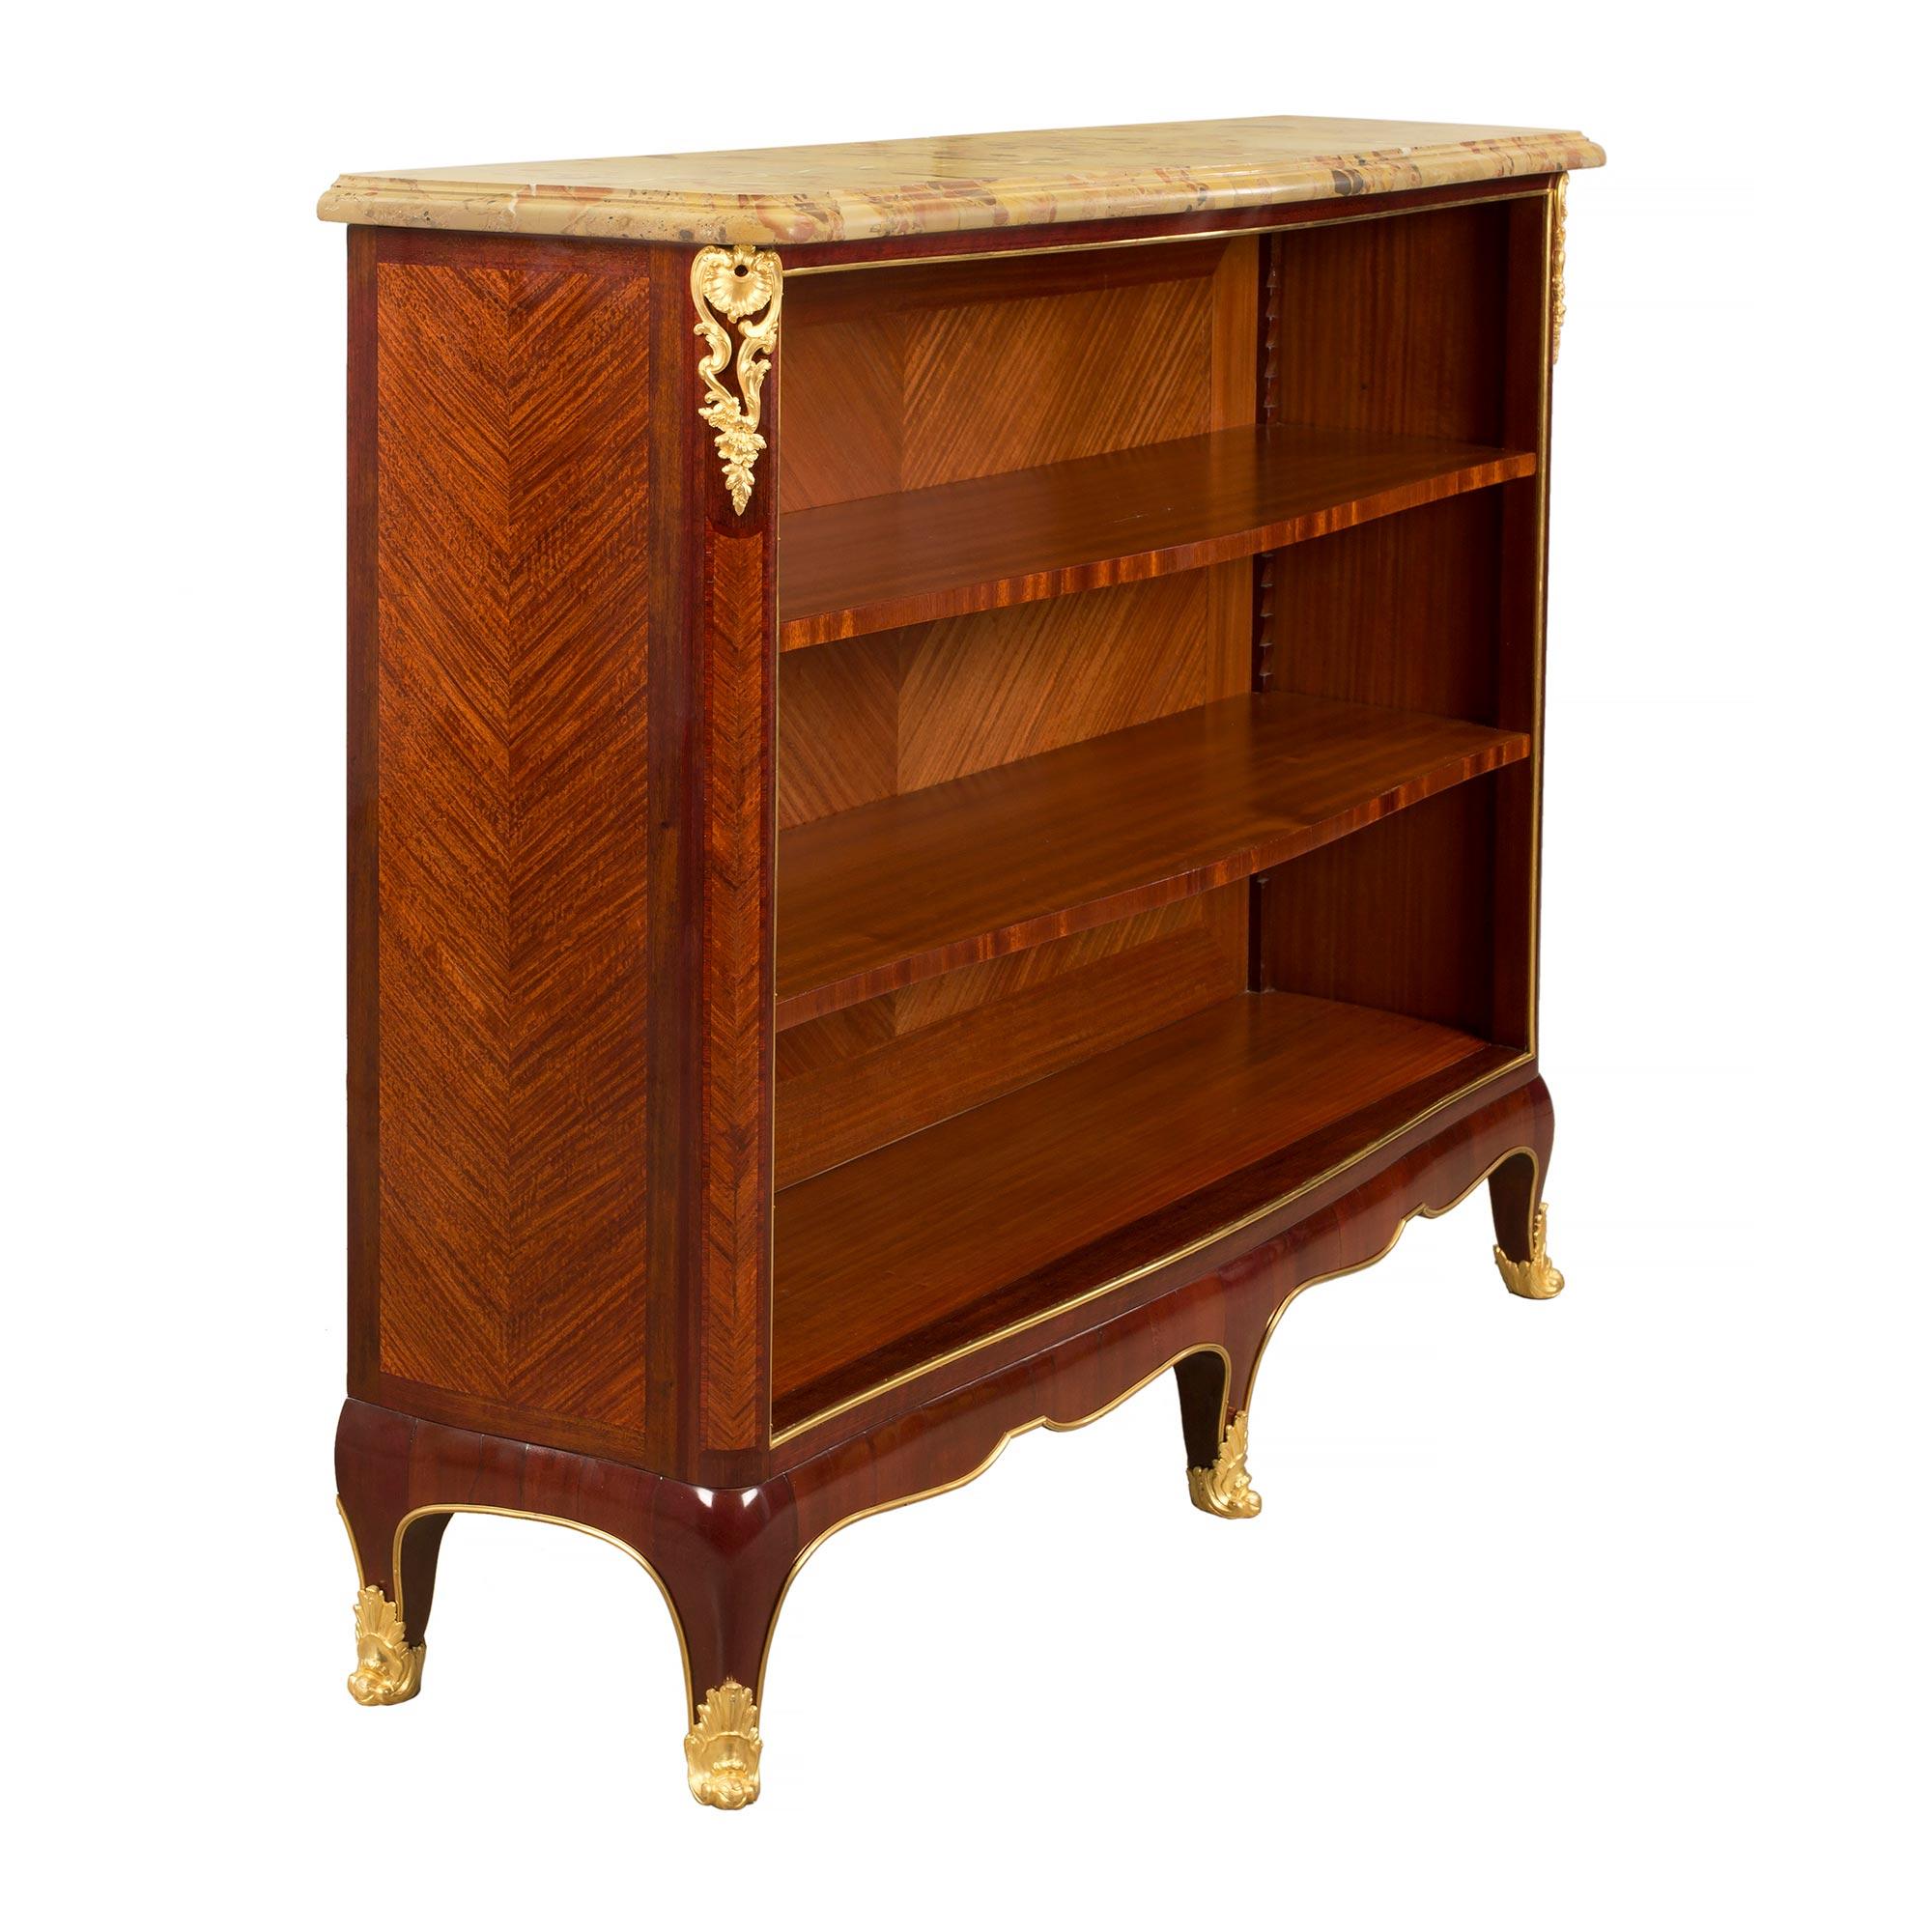 French 19th Century Louis XV Style Tulipwood and Ormolu Bibus In Good Condition For Sale In West Palm Beach, FL